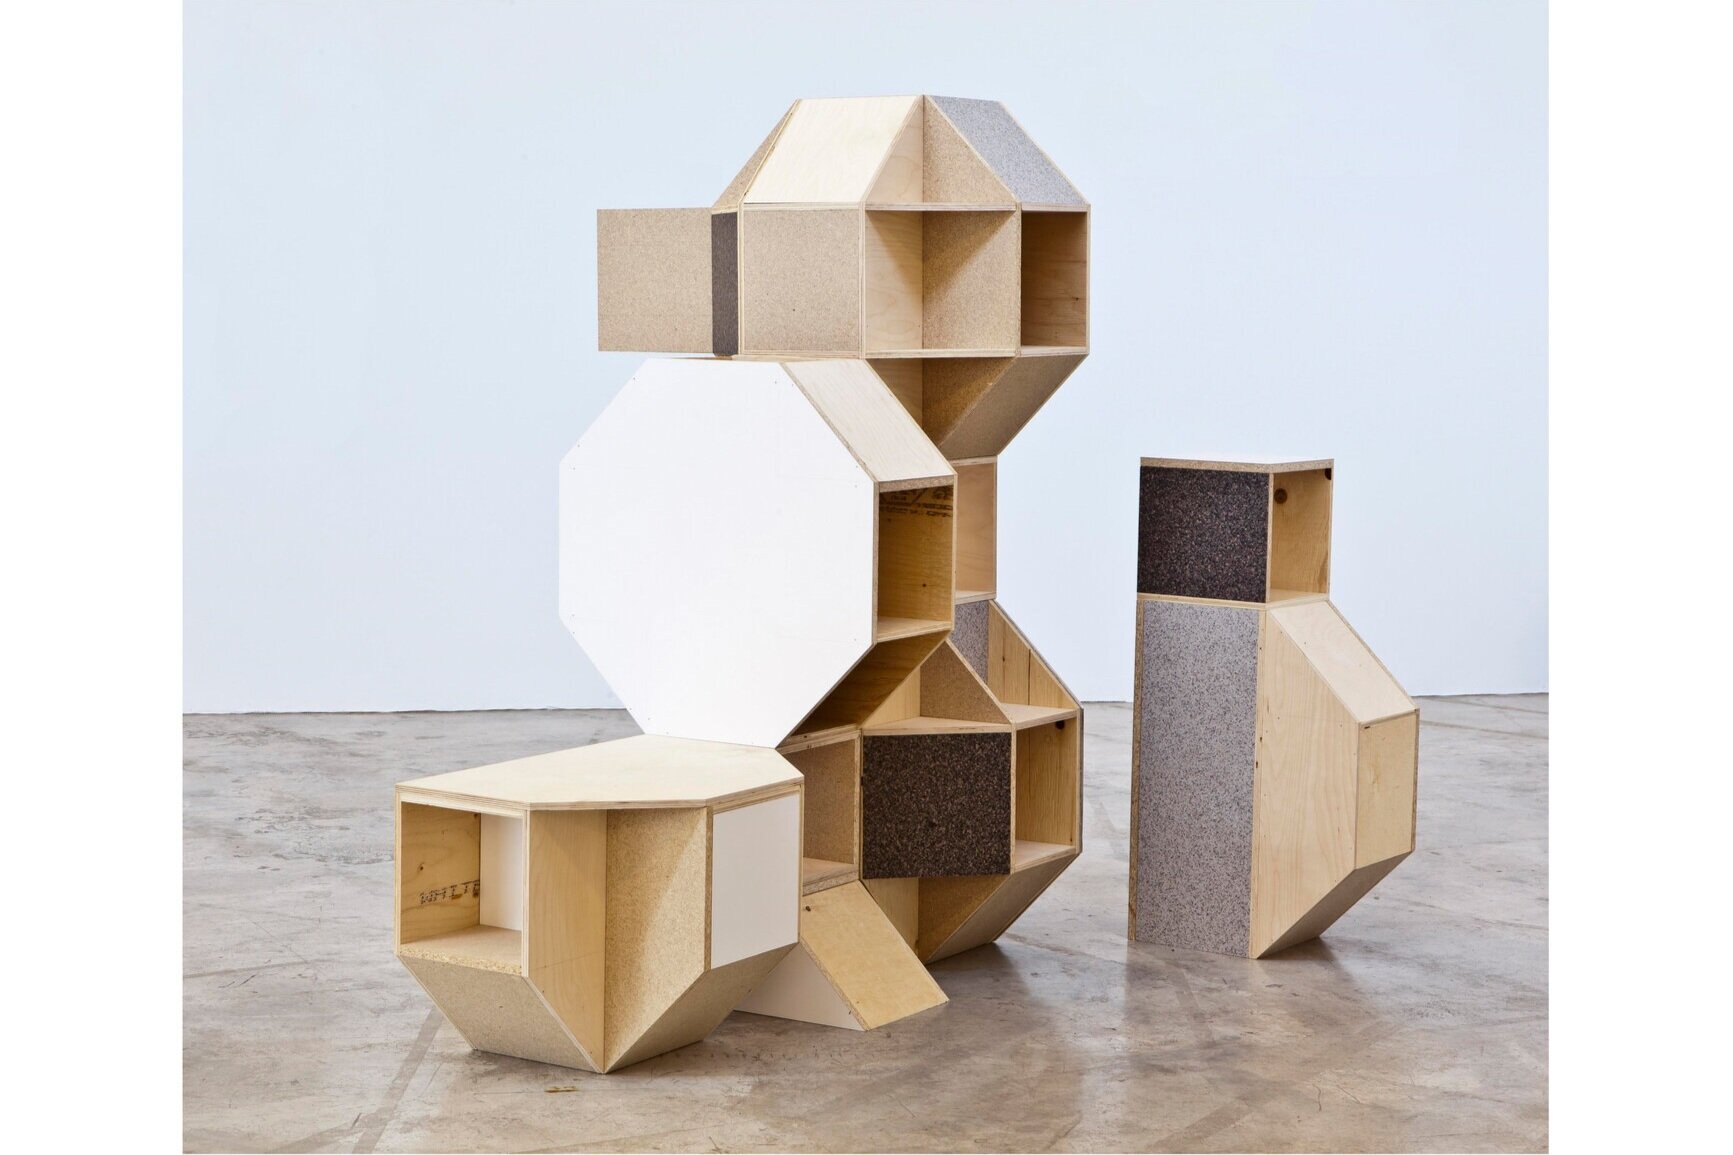 Mattamy Contemporary, 2011, Spruce plywood, birch plywood, countertop, tiles, particle board and shims